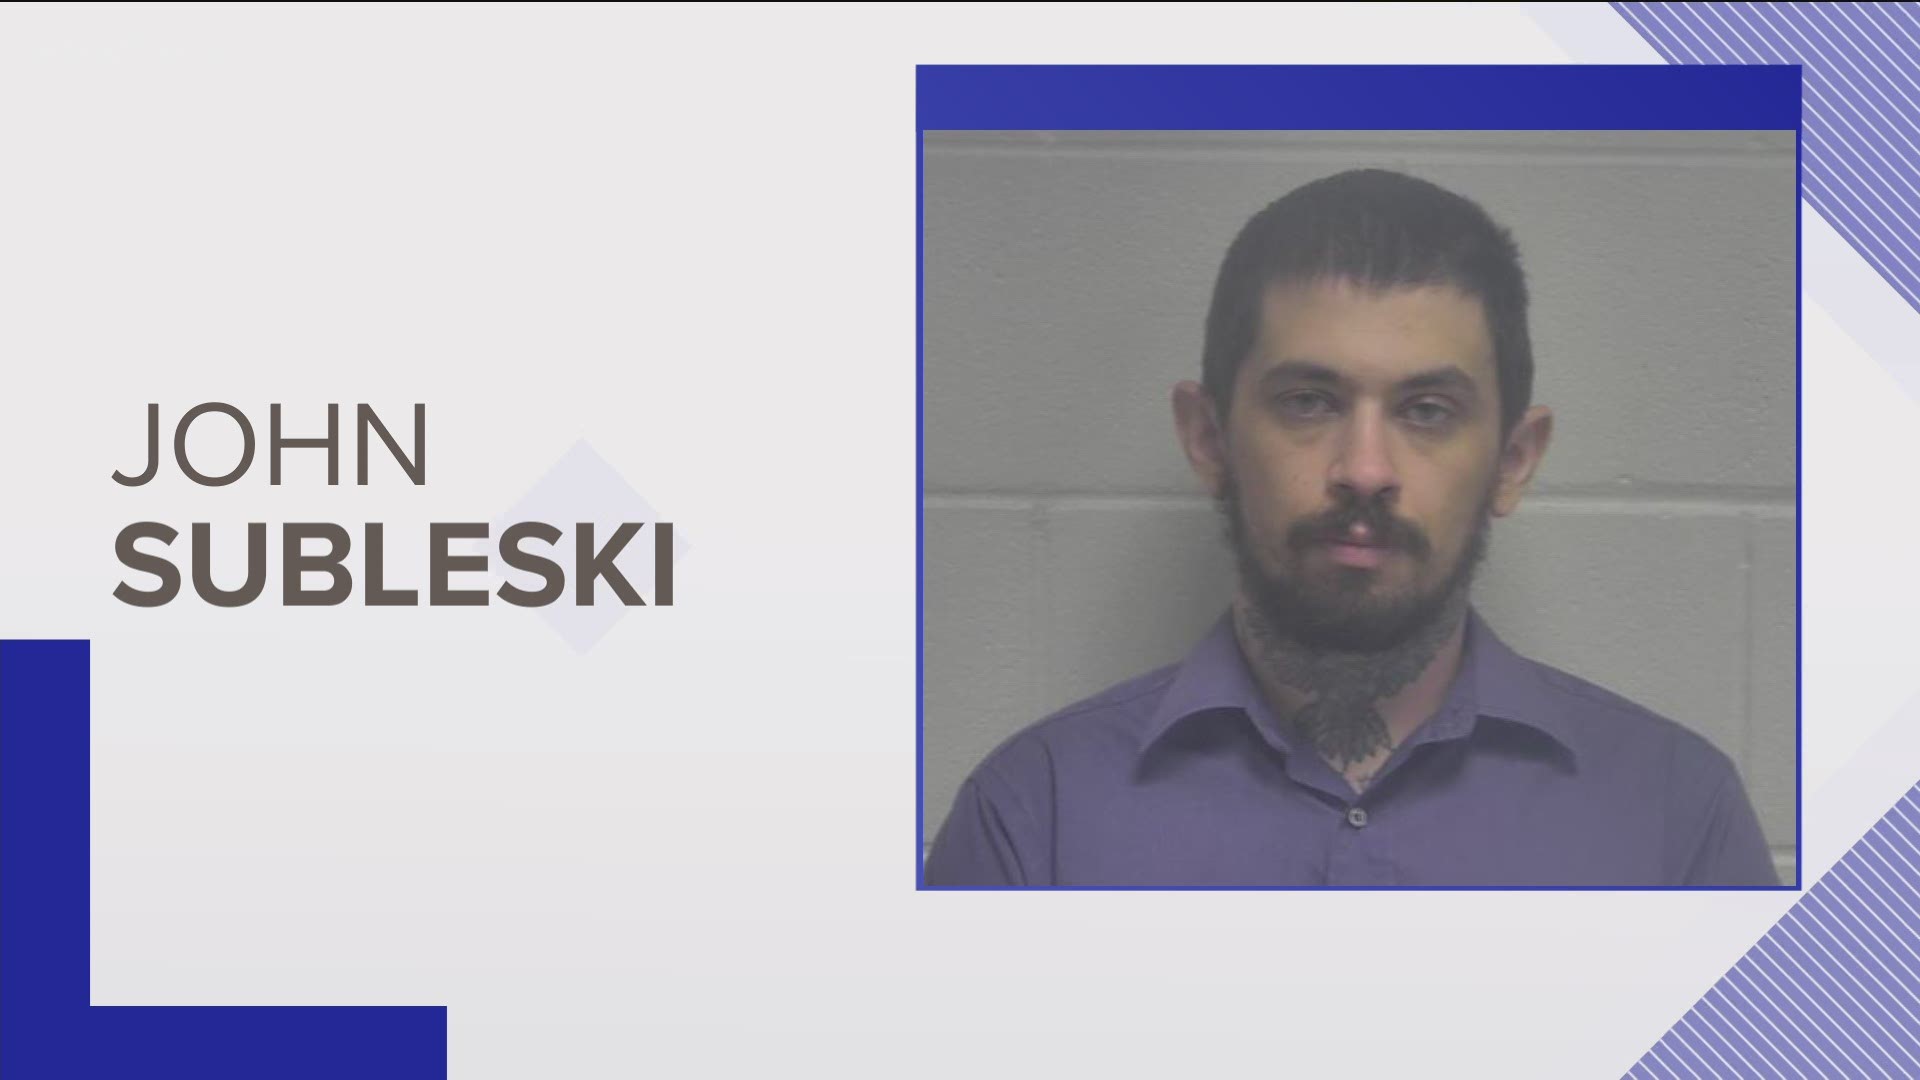 John Subleski received credit for time served and supervised release for three years as part of a plea agreement in the Jan. 6 incident.